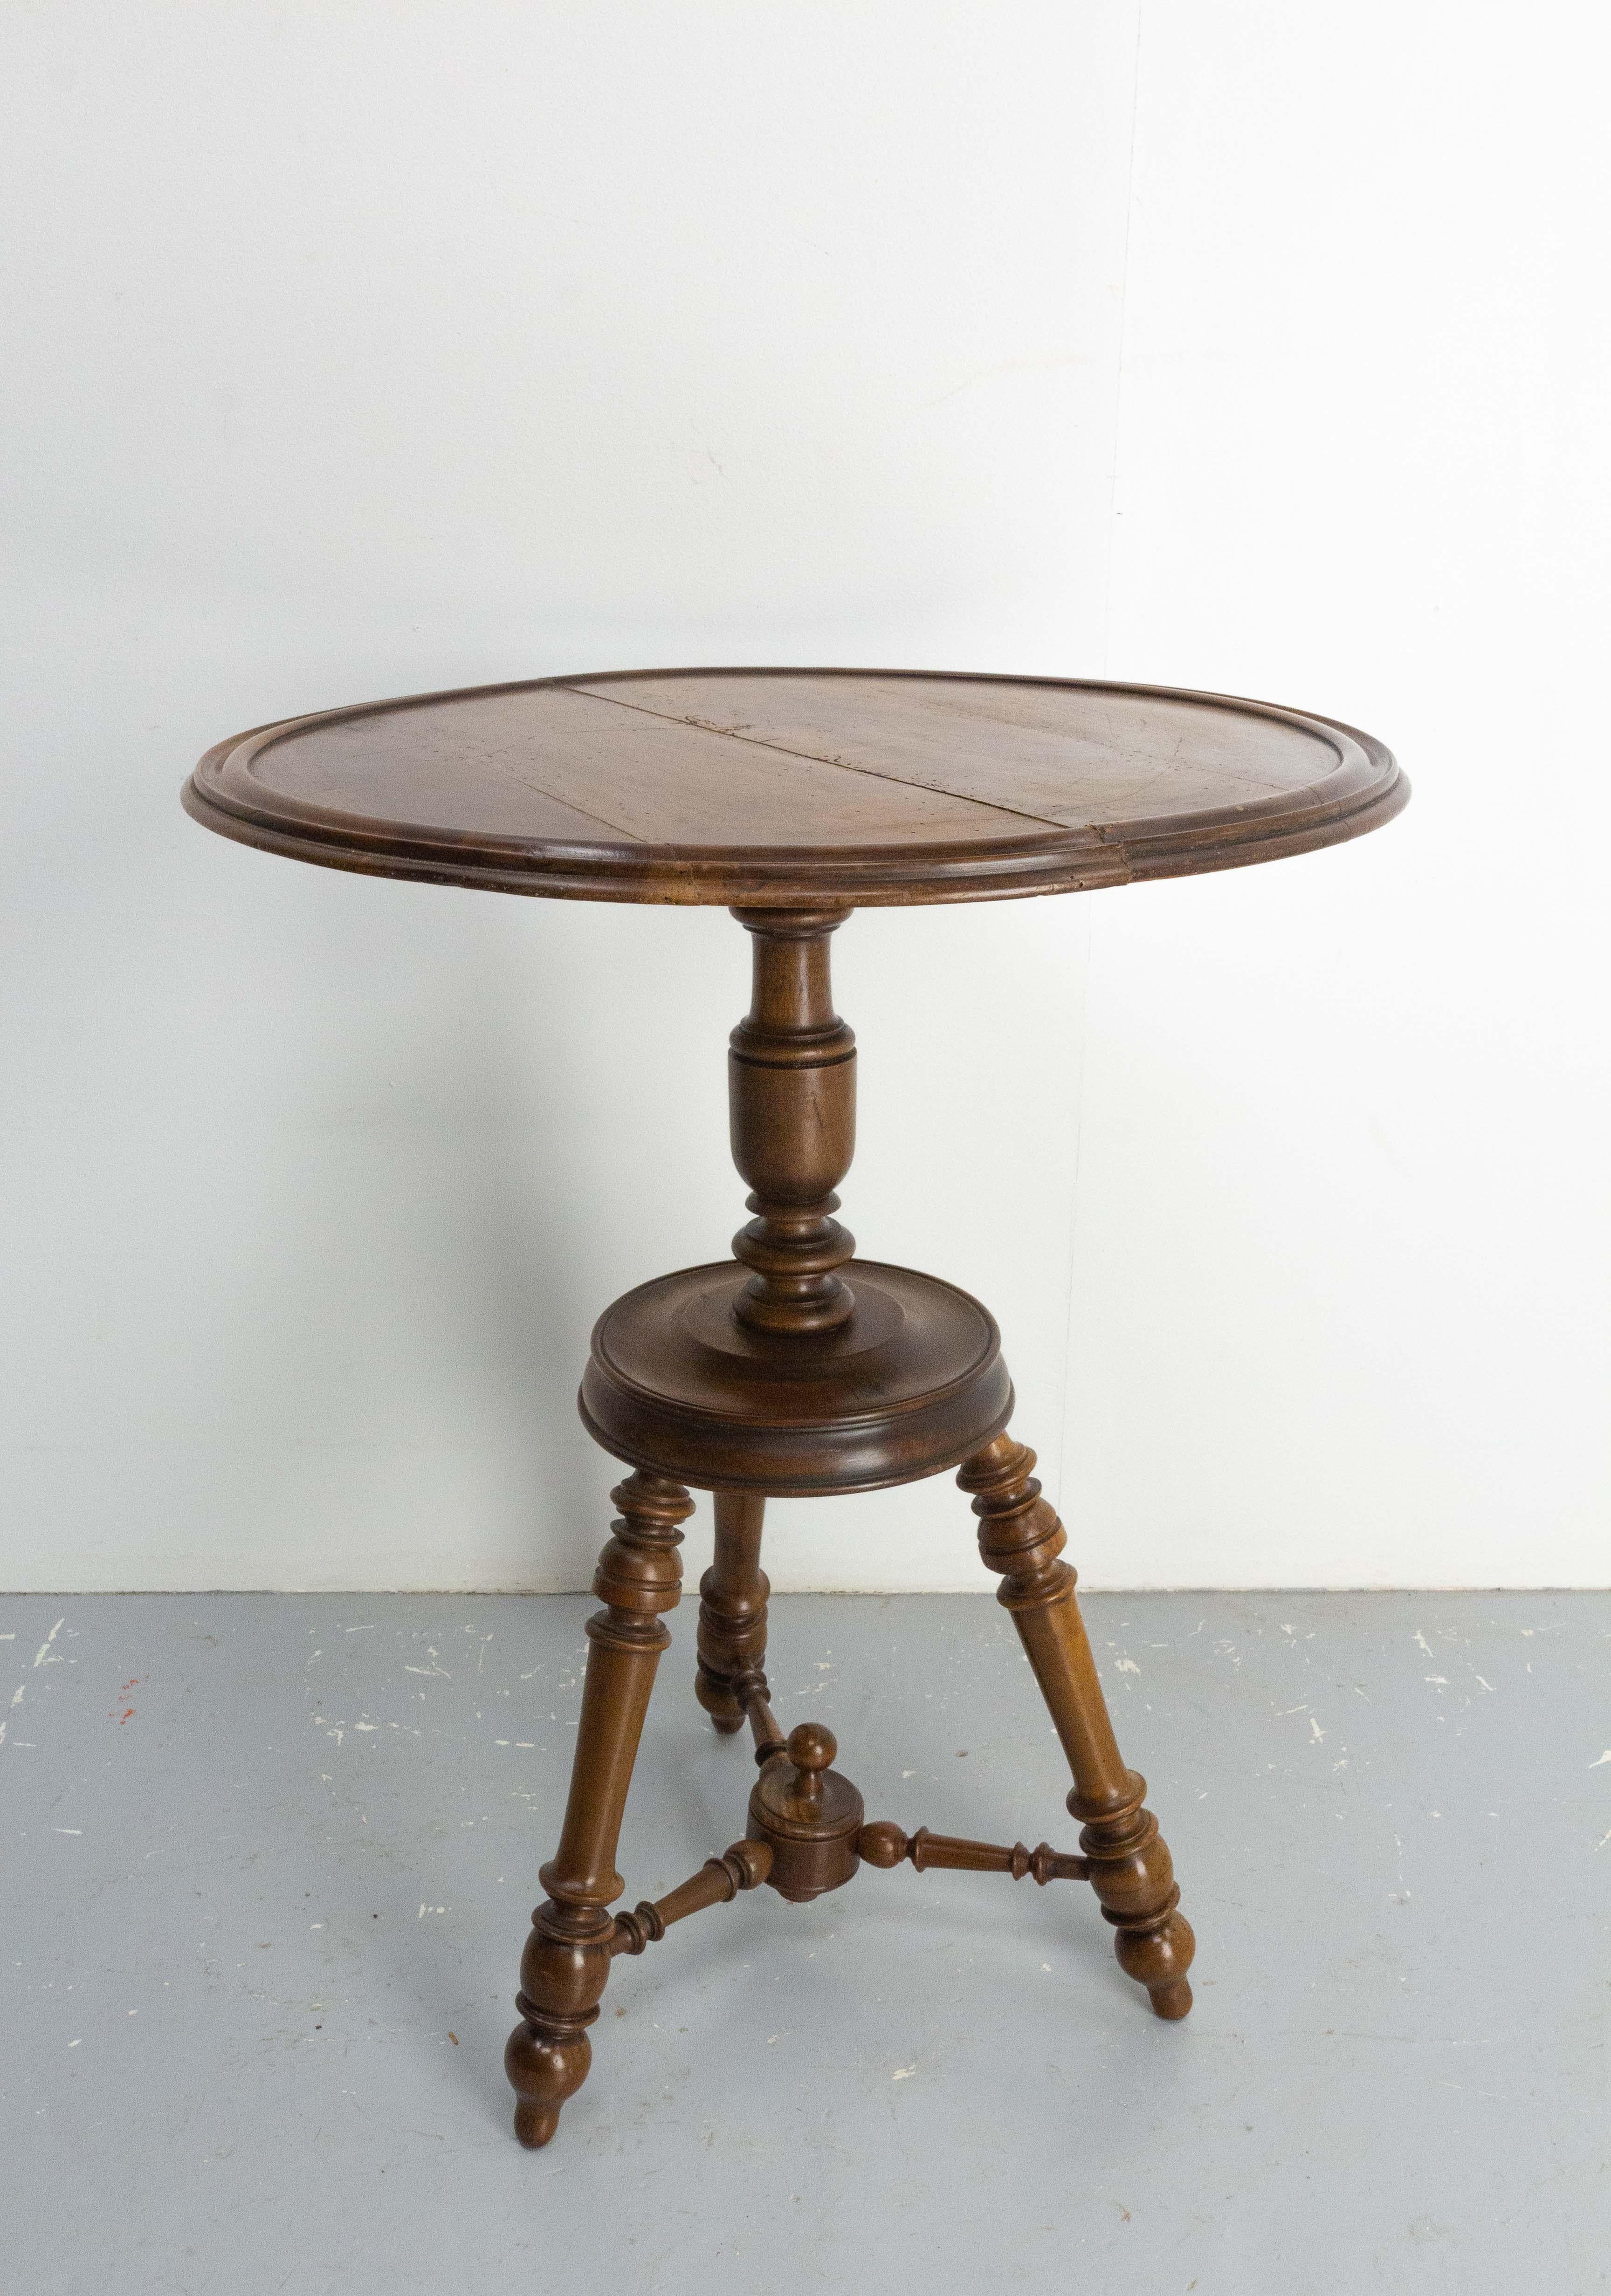 Walnut round side table 
Made circa 1970
The pedestal has three feet.
You can also use the coffee table as an end table.
Solid and massive design
Good condition, delivered disassembled, stable assembly, once screwed.

Shipping:
60 / 39 / 72